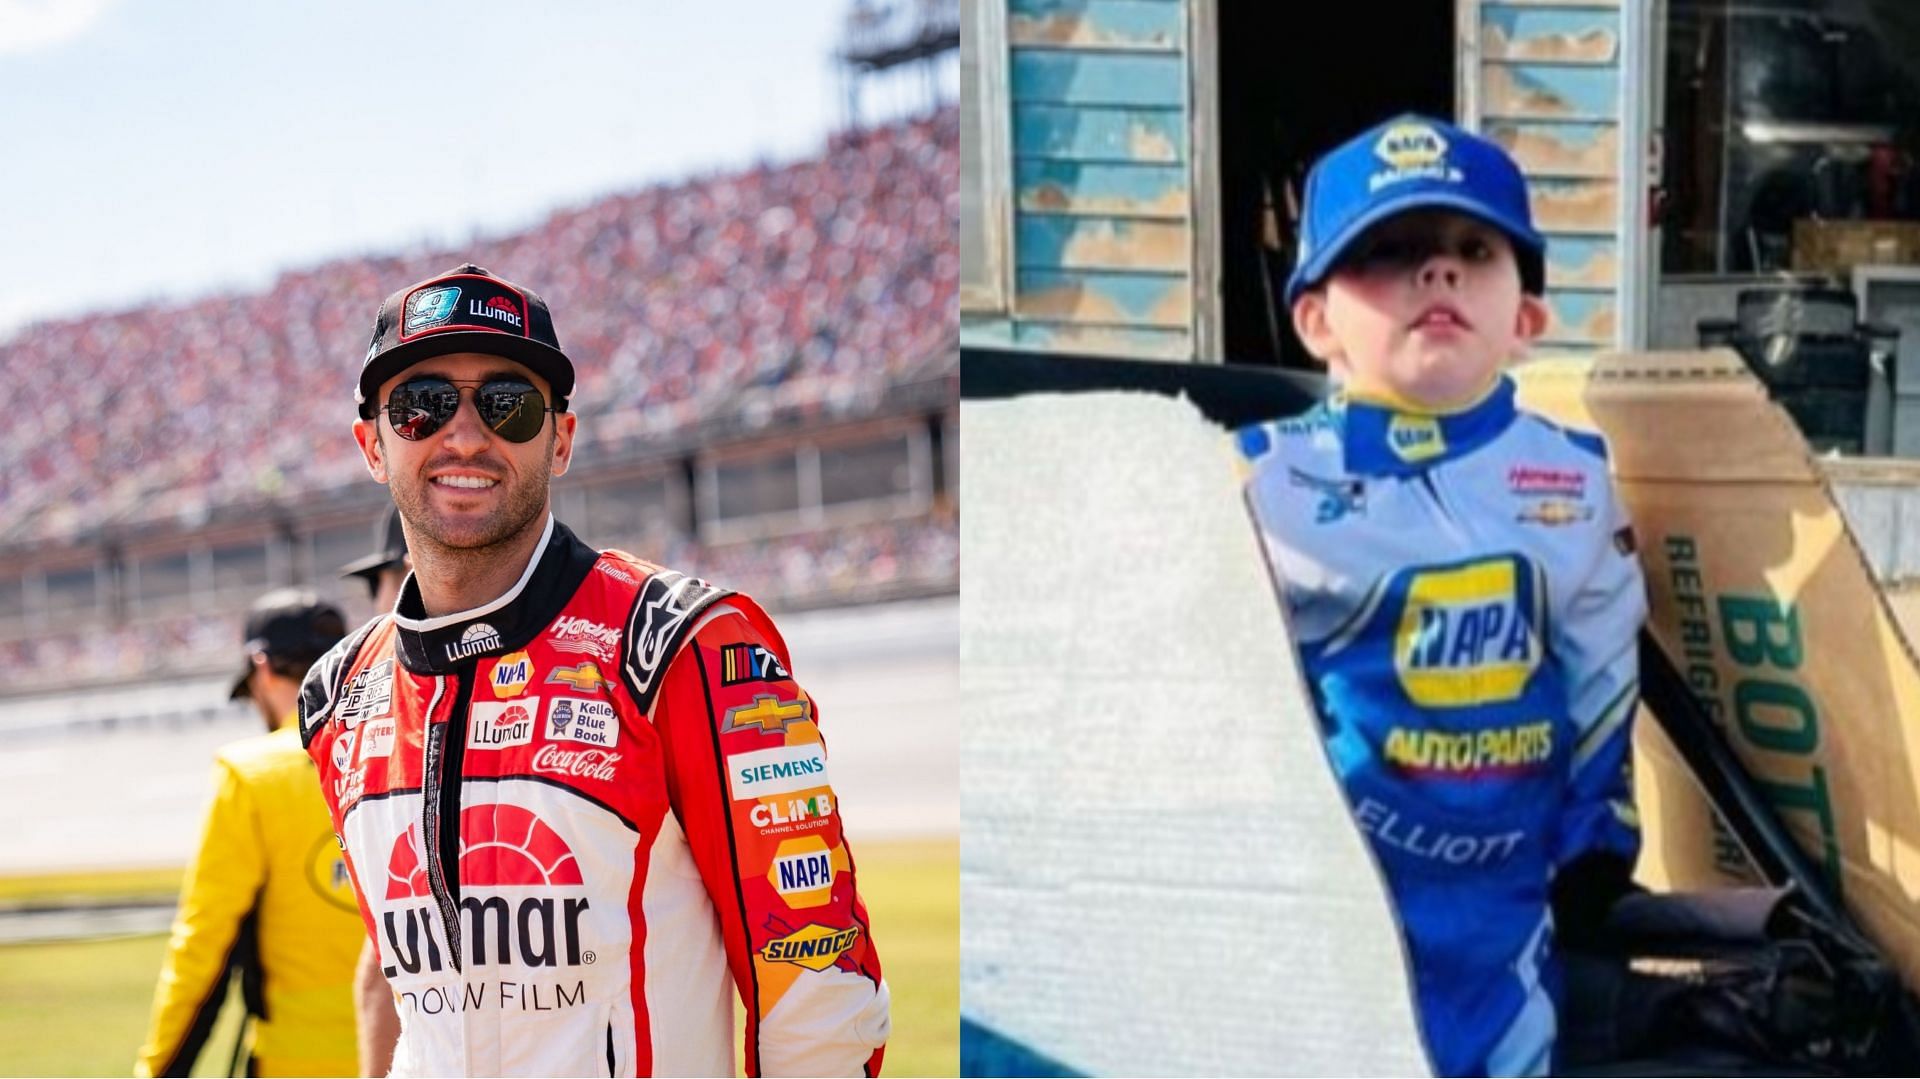 Chase Elliott reacts to a young fan sporting his racing gear as a Halloween costume